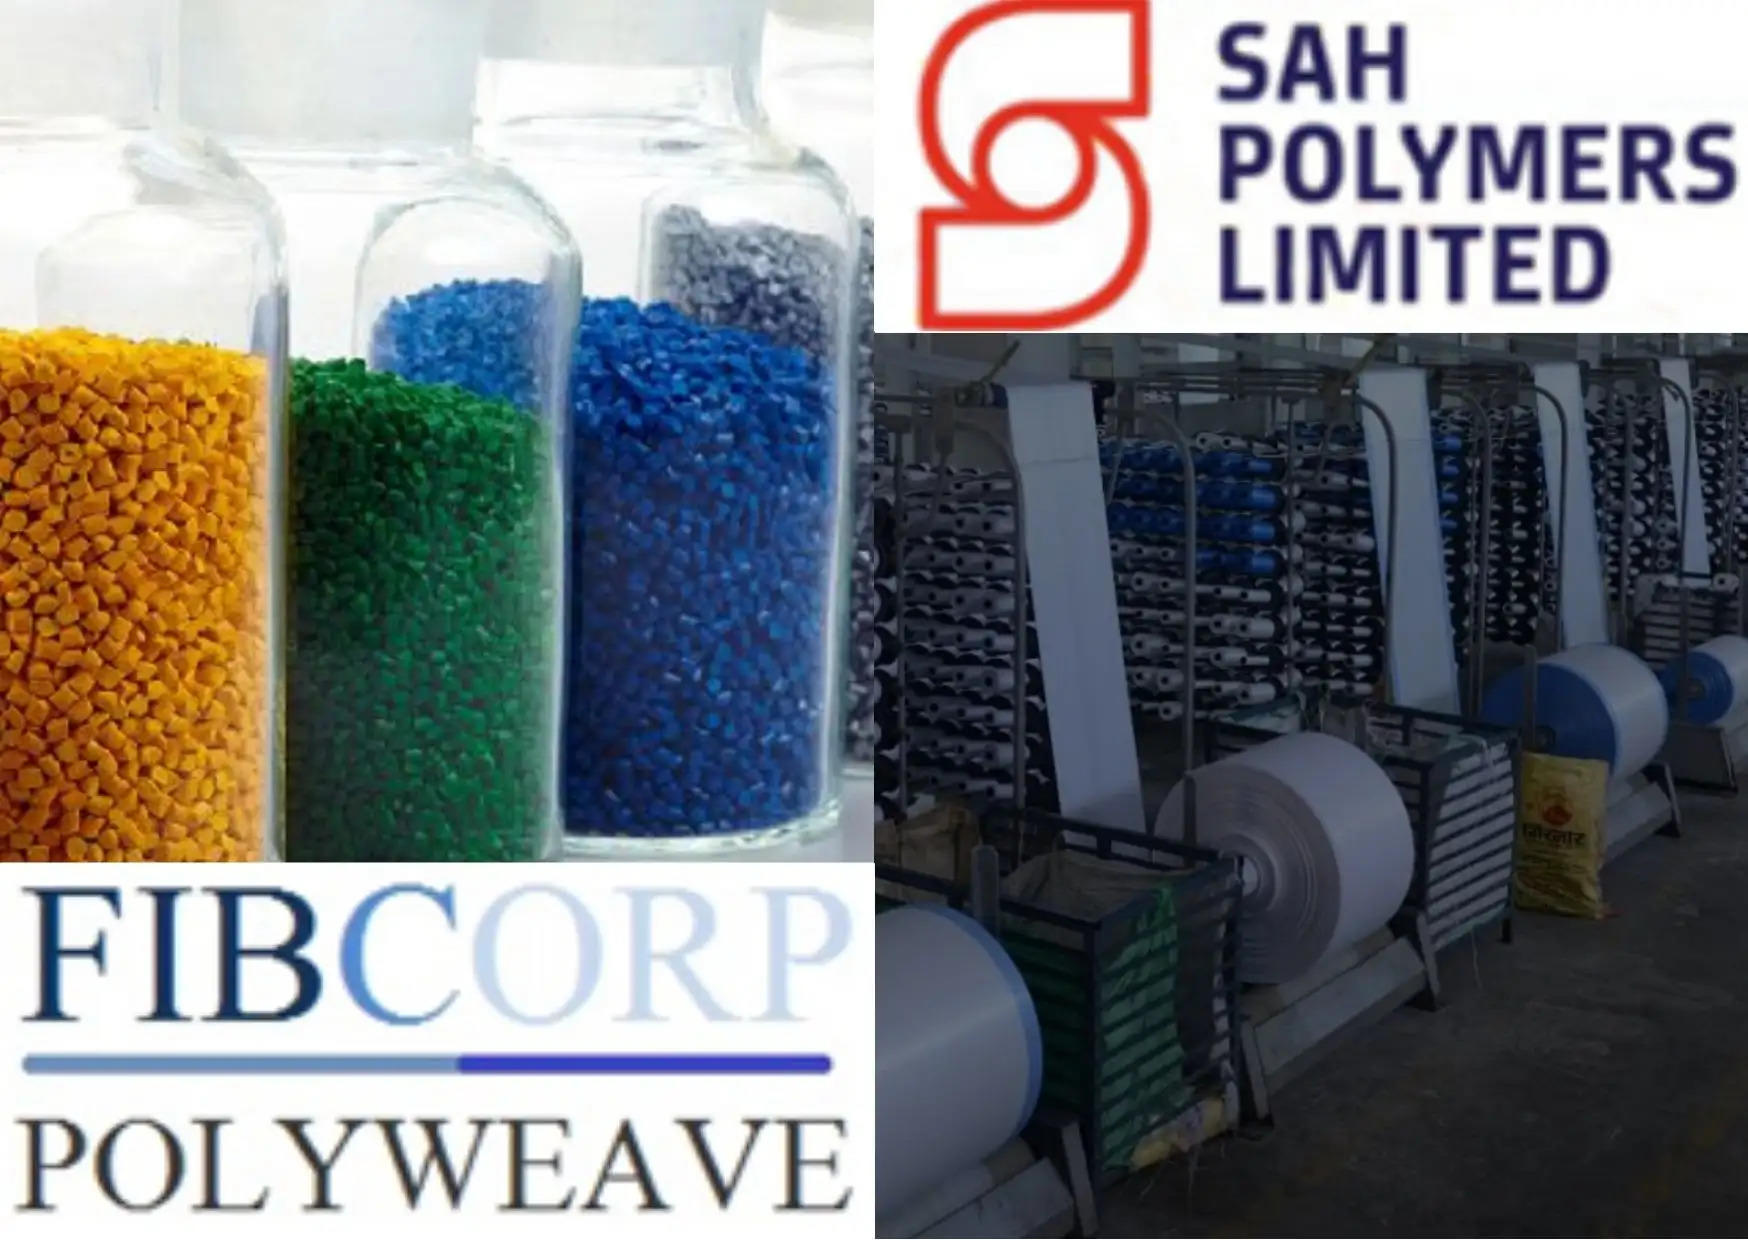 SAH Polymers FIBCORP PP Woven Bag manufacturer in india best PP Woven bags Udaipur Business IPO